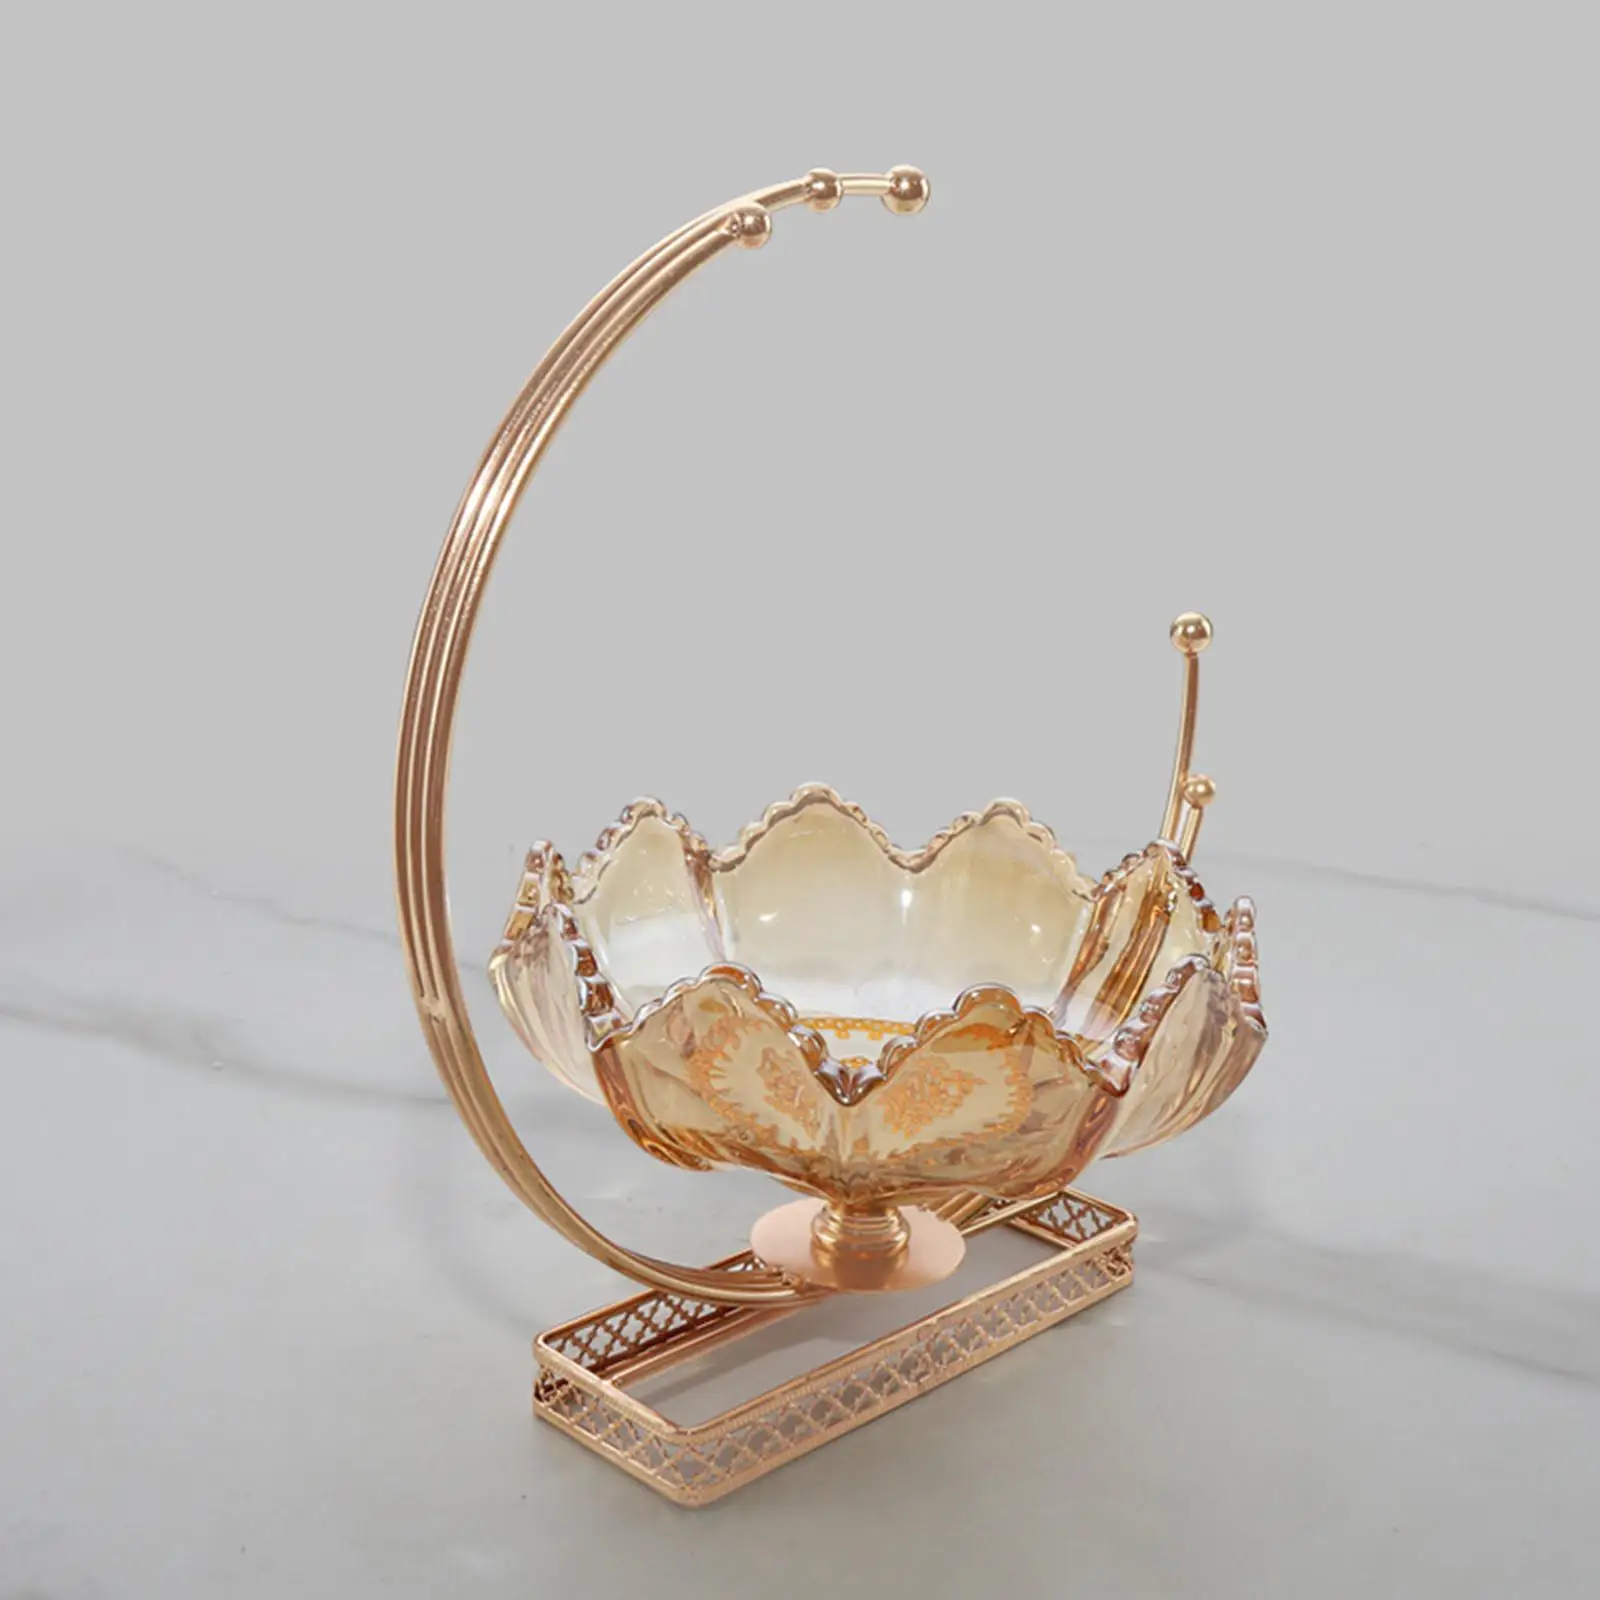 Glass Fruit Tray Appetizer Tray Wedding Display Stand Dessert Serving Plate Serving Tray for Event Banquet Afternoon Tea